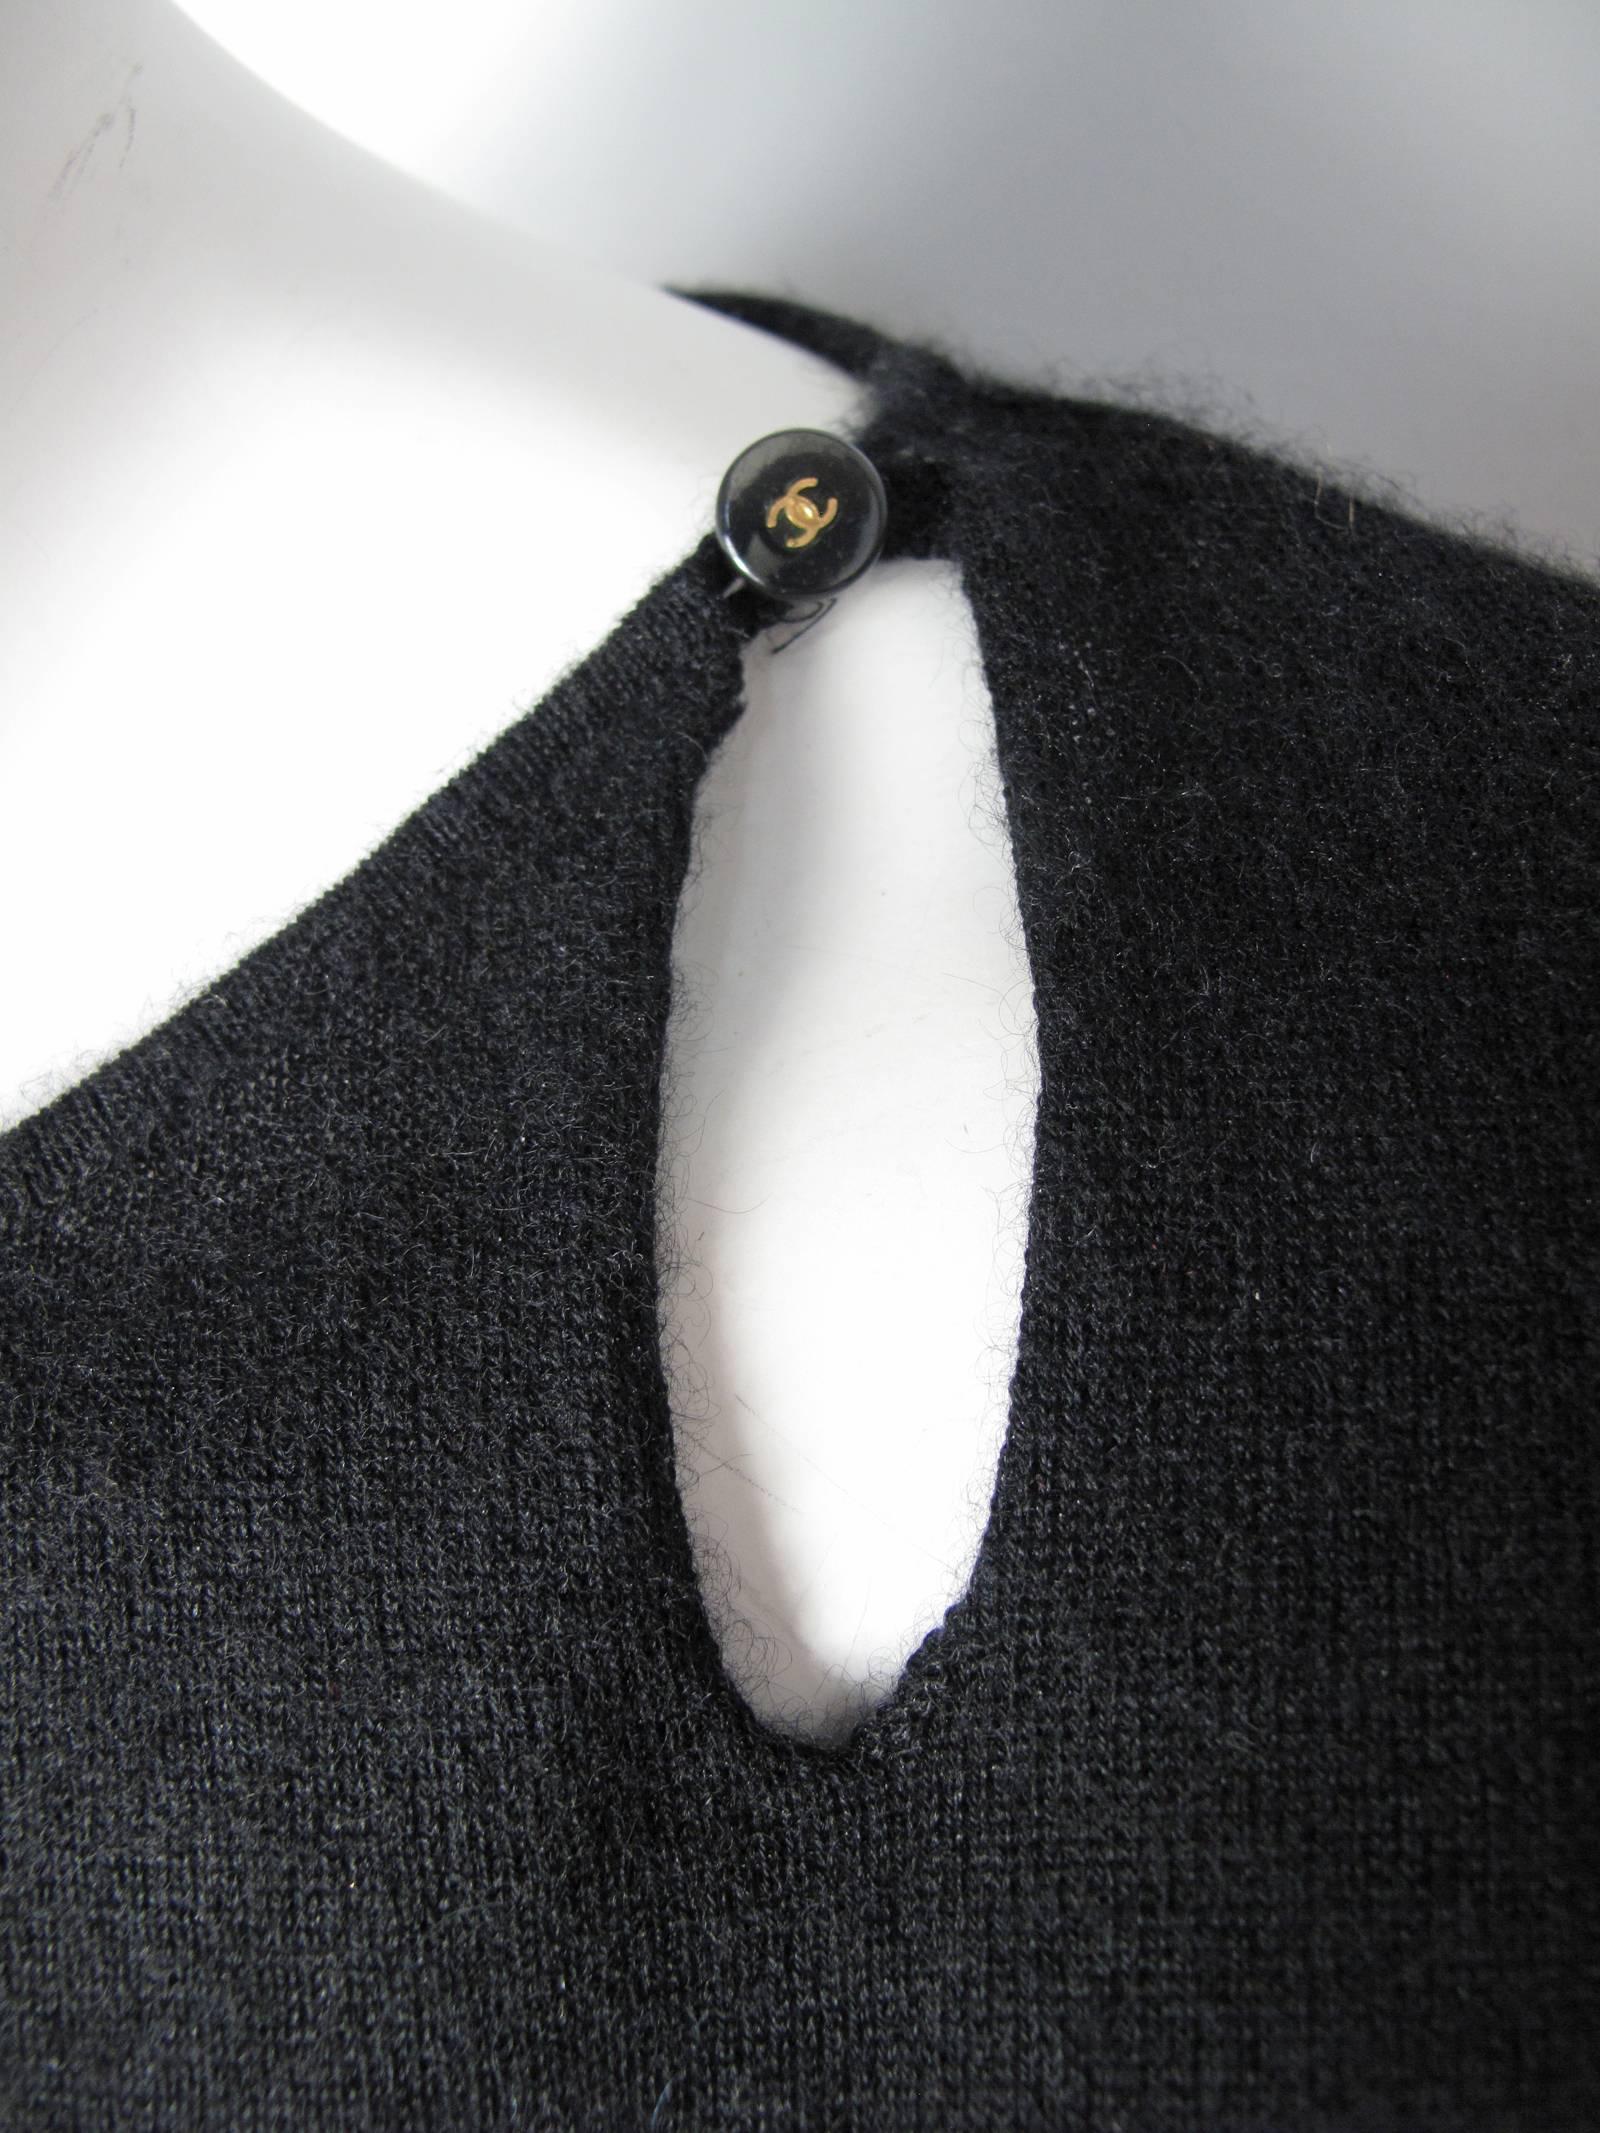 Chanel black cashmere sweater with with one button tear drop opening at neck, bell sleeve with one button closure. Condition: Very good. Size 42
We accept returns for refund, please see our terms.  We offer free ground shipping within the US. 